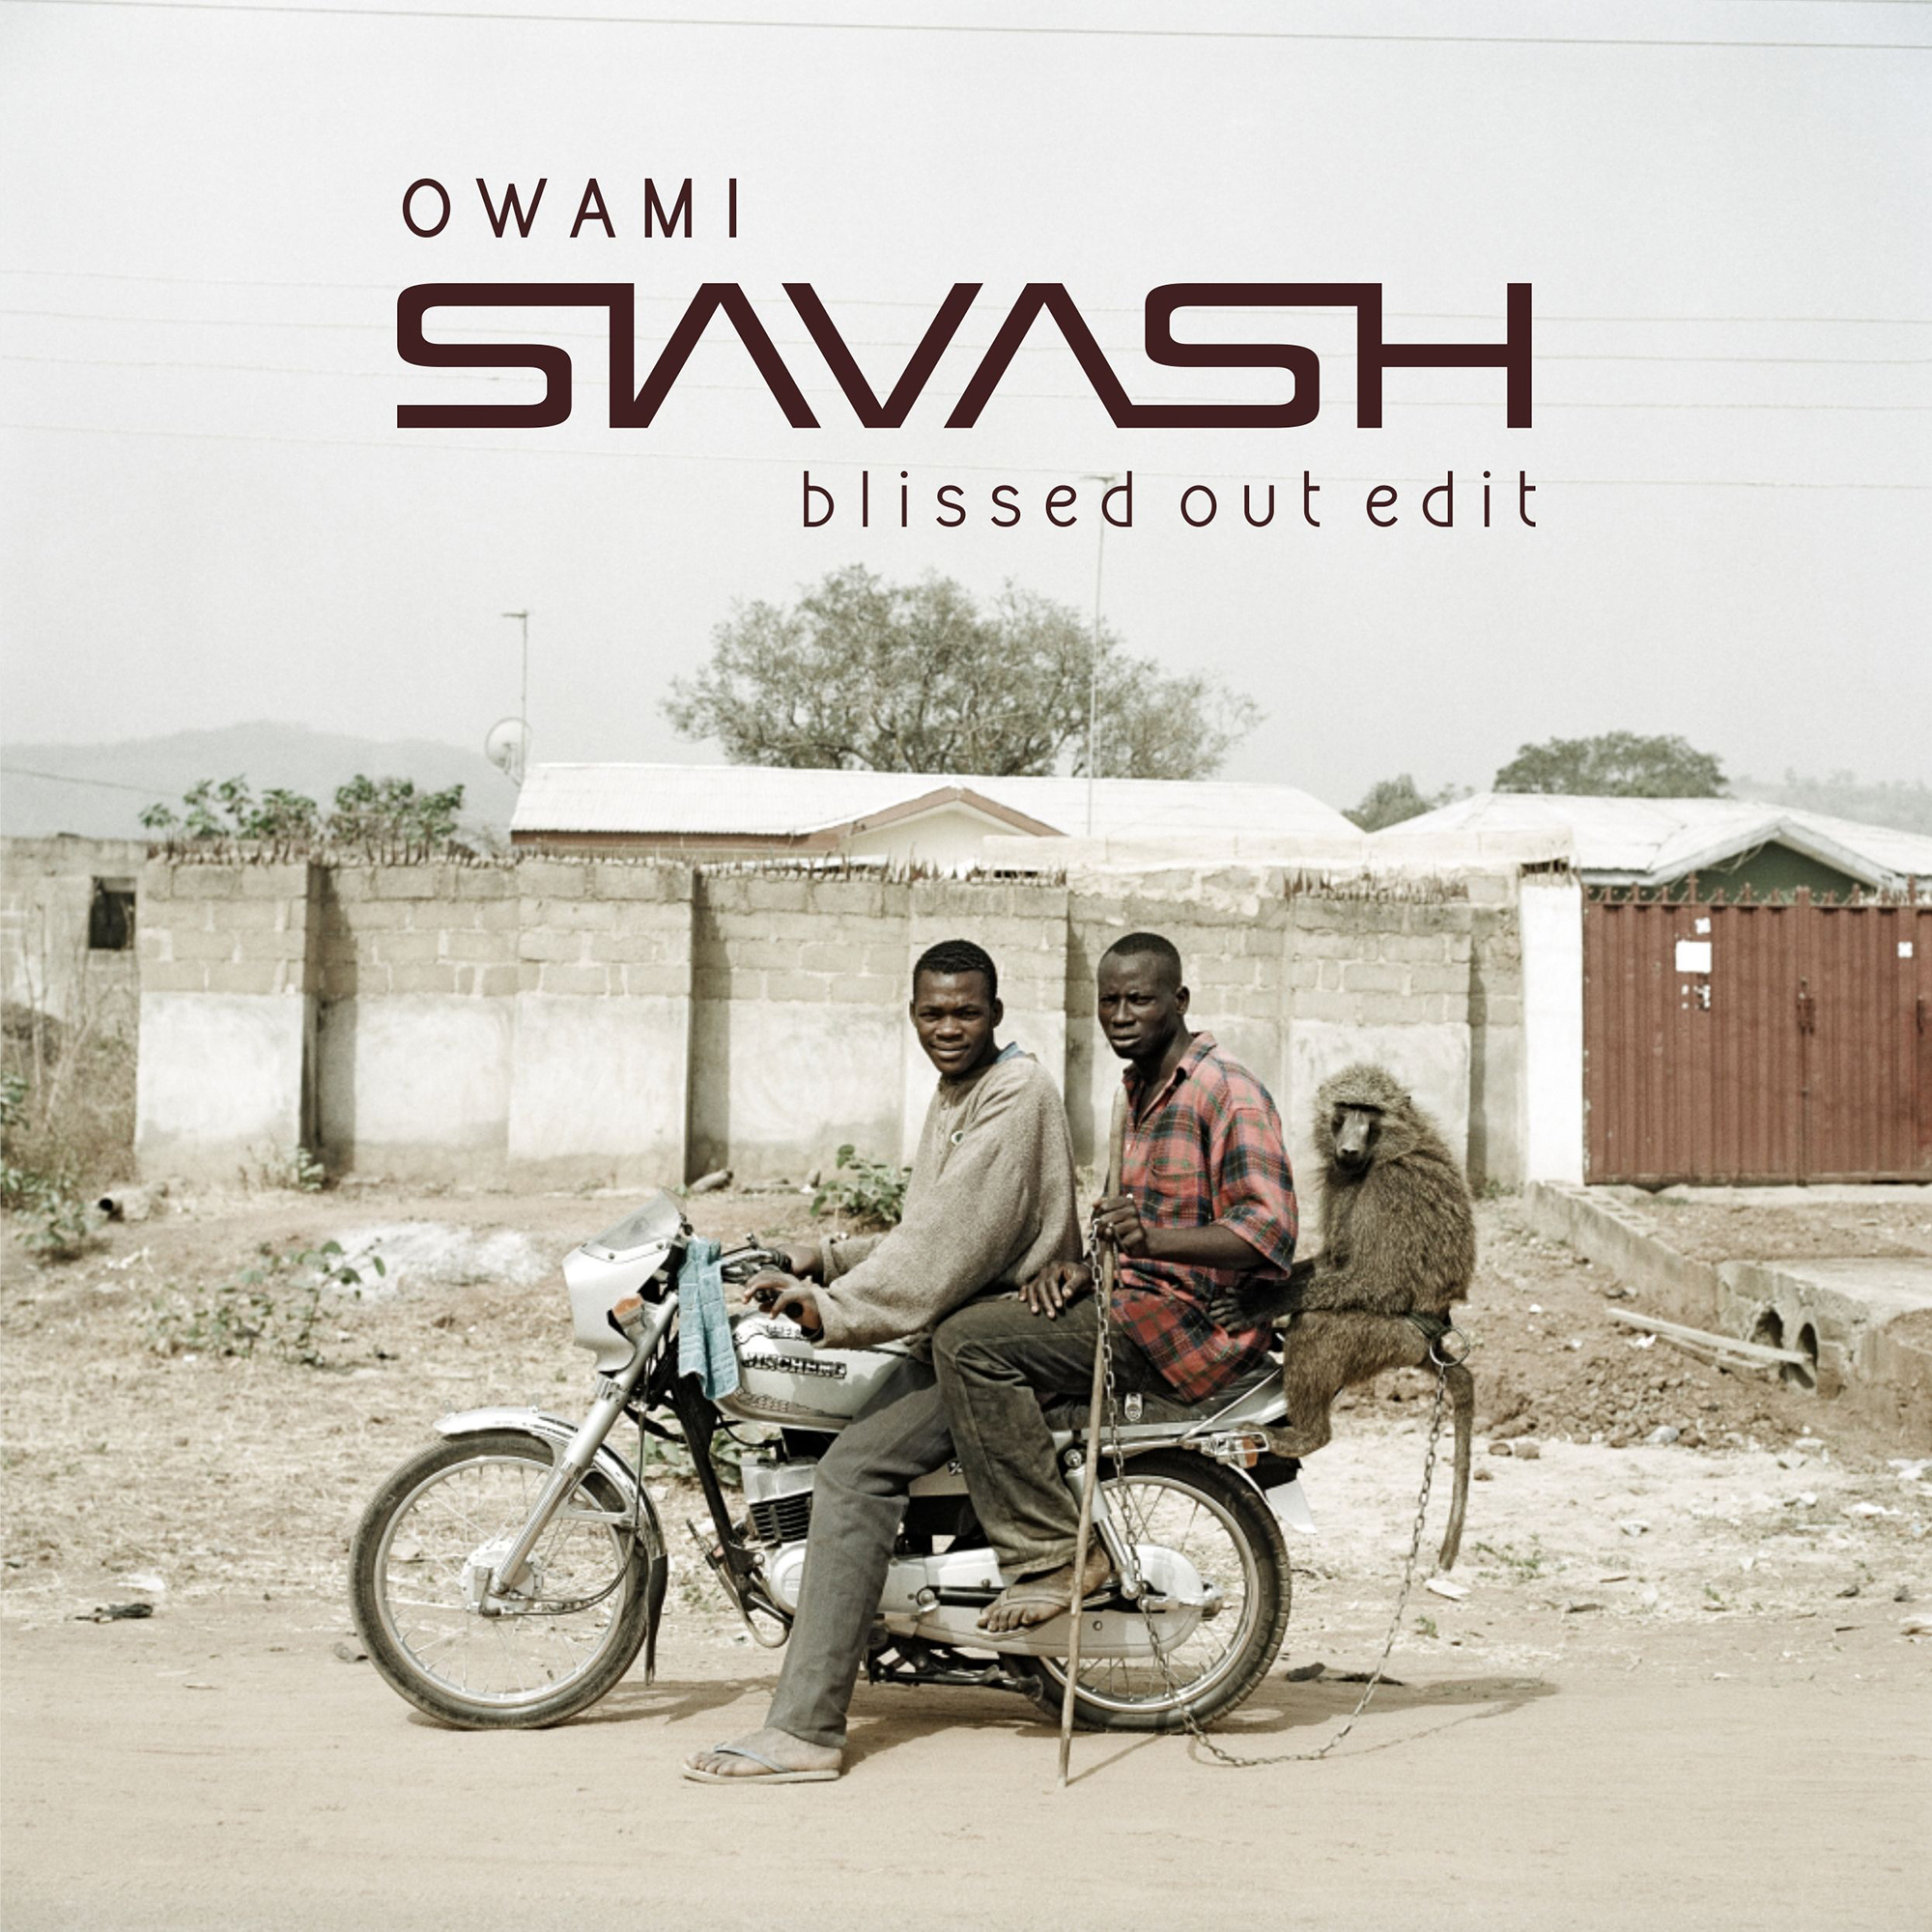 Owami (Siavash Blissed Out Edit)